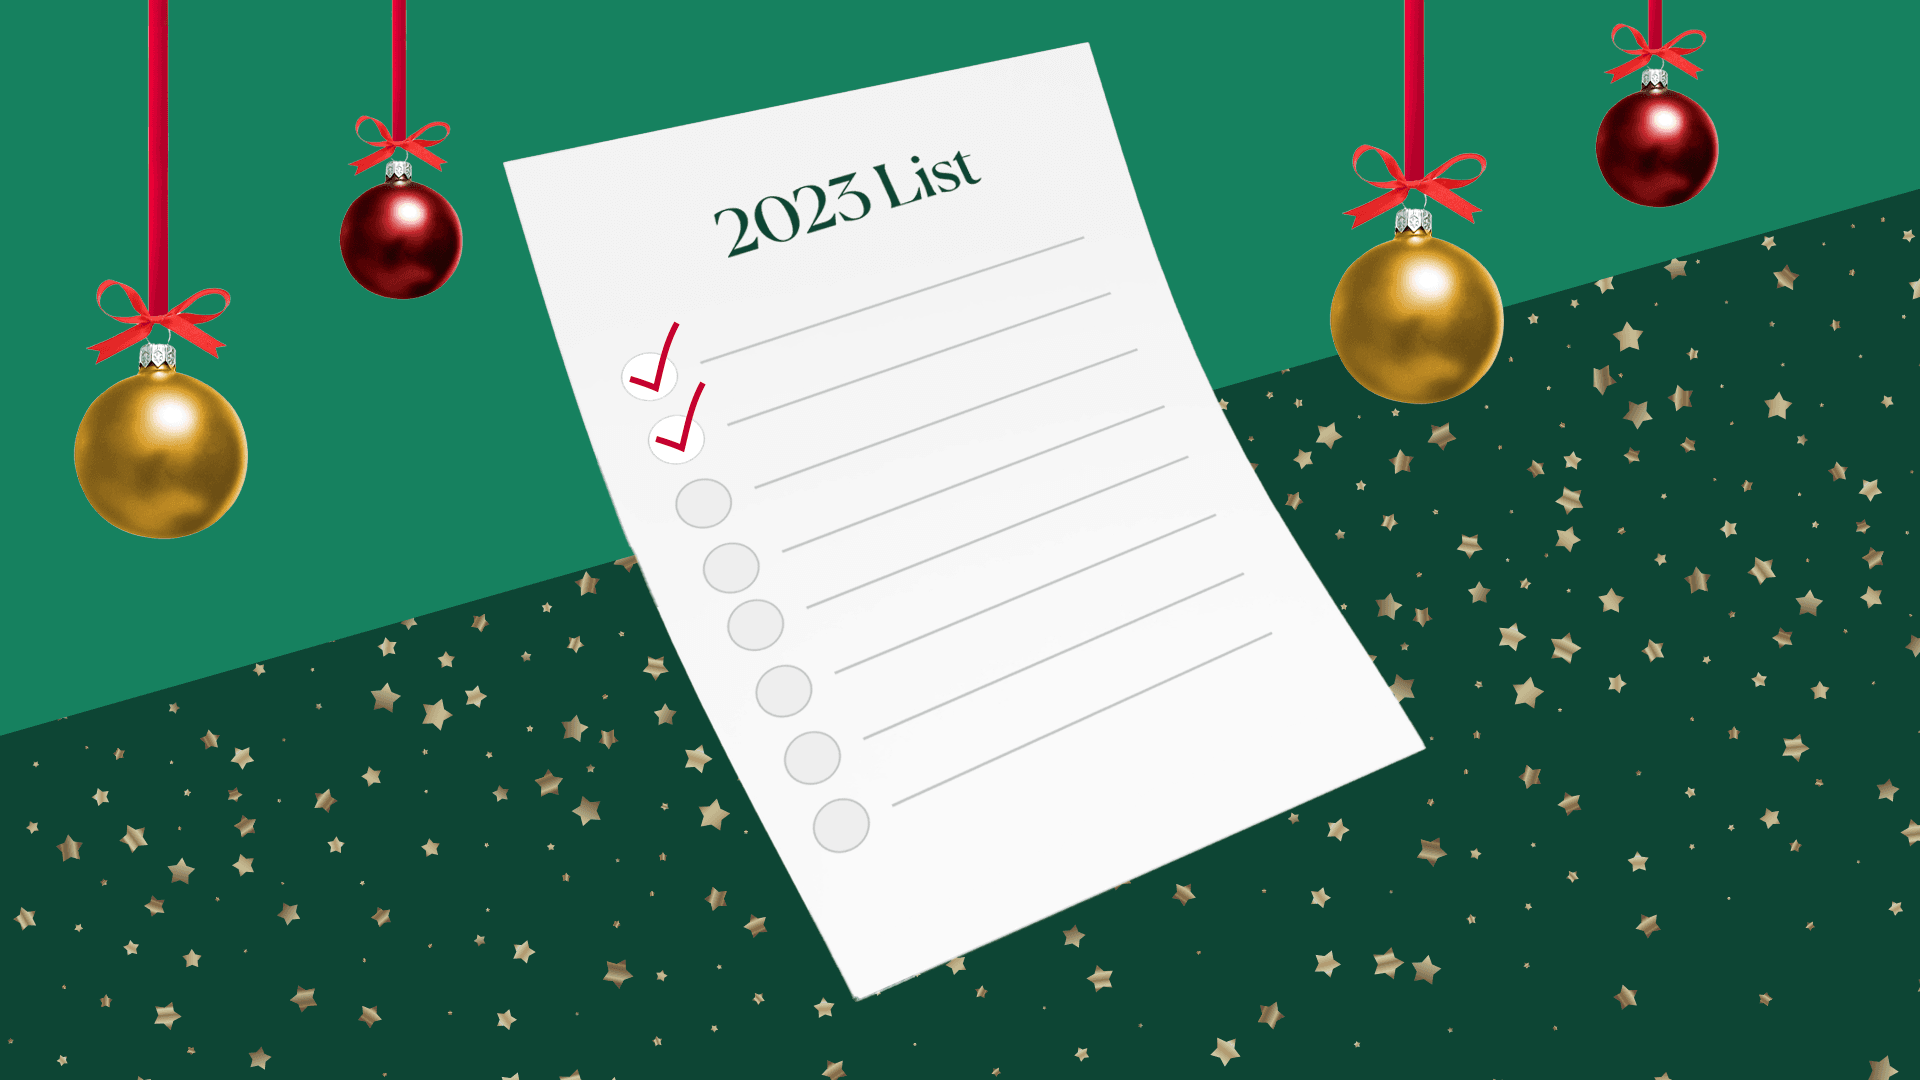 Holiday Event Planning Checklist: Your Guide to the 2023 Holidays